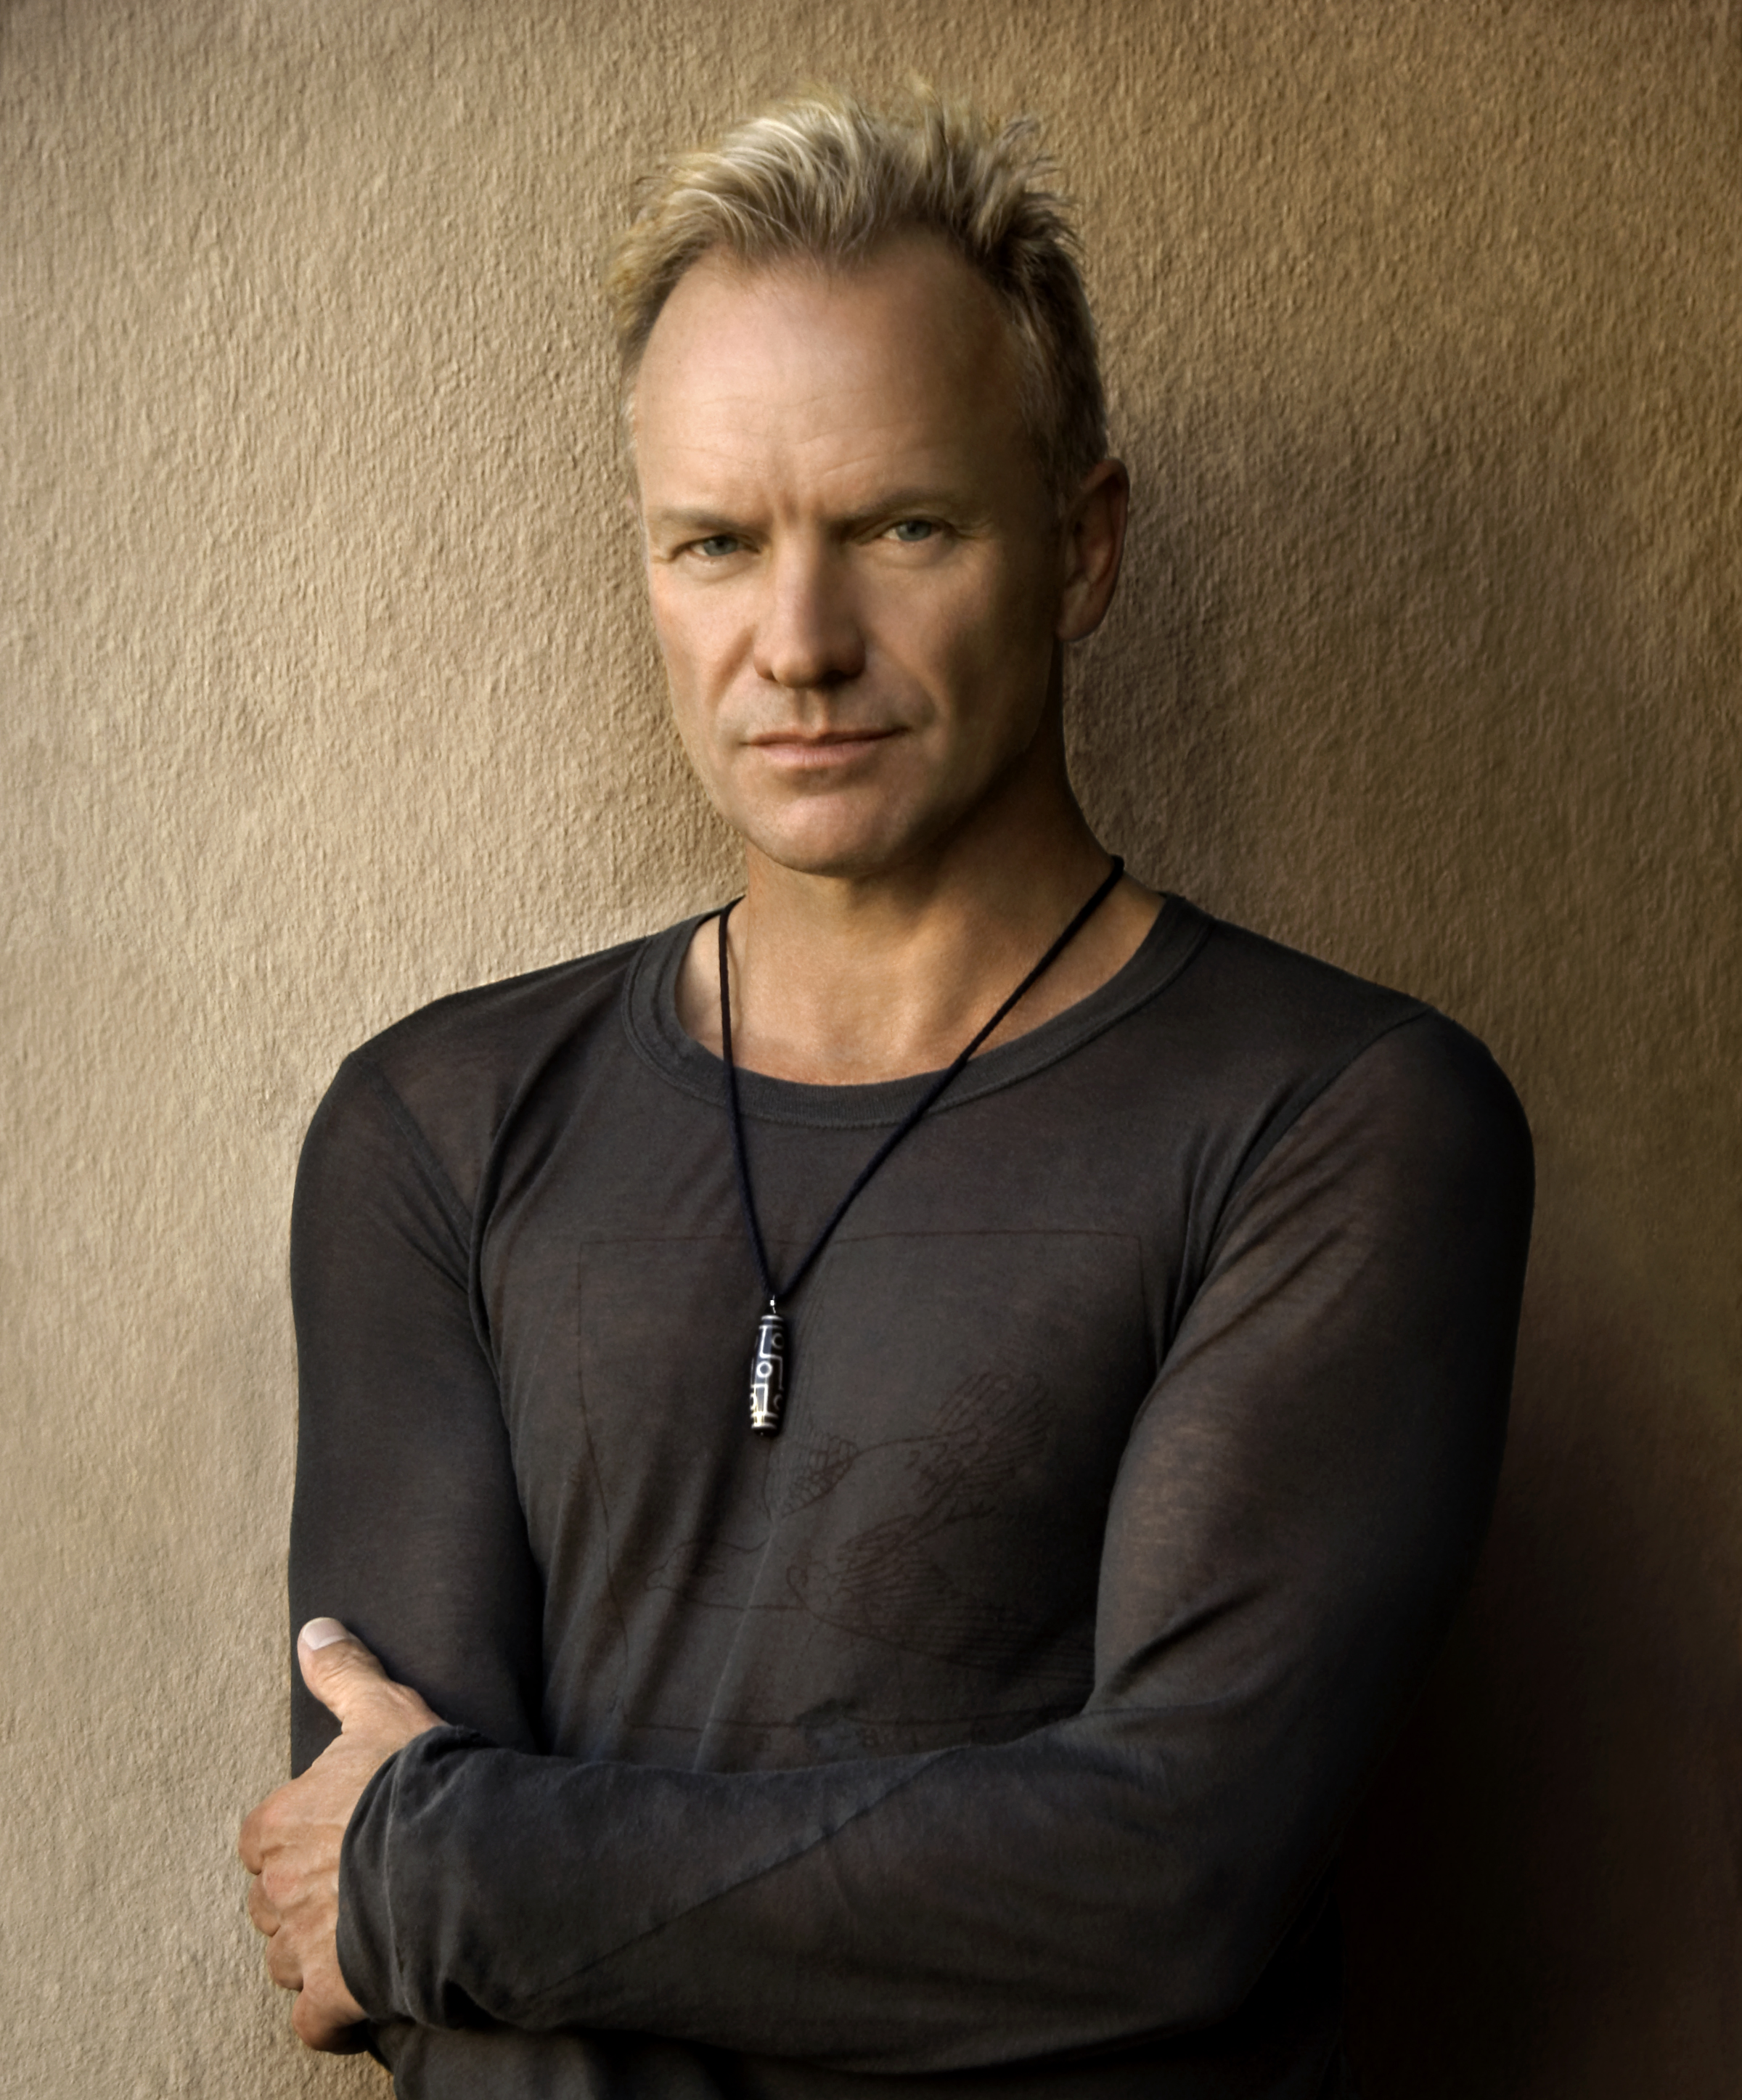 STING.com - Official Site and Official Fan Club for STING news.